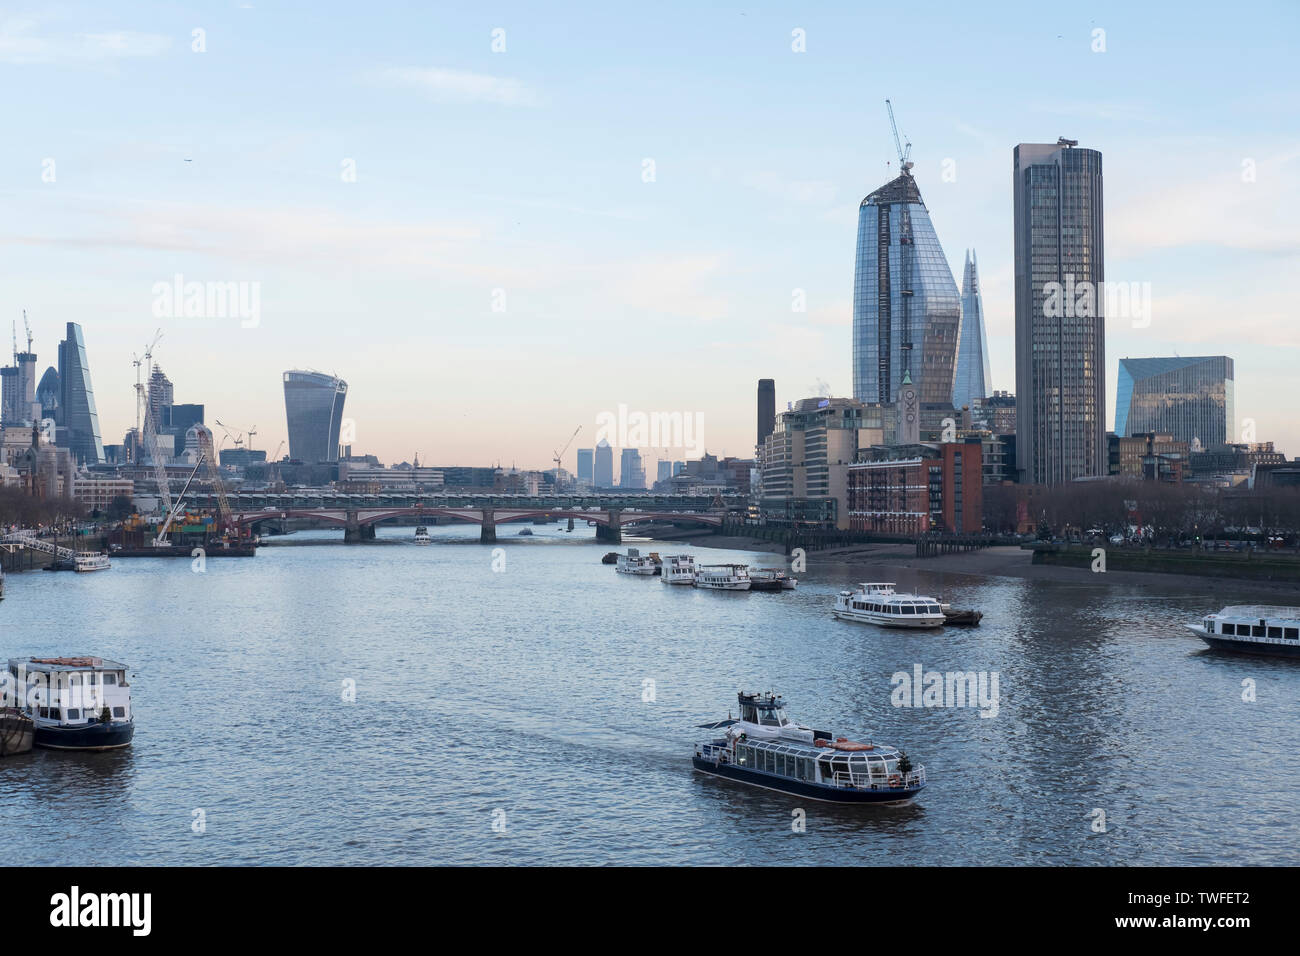 The cityscape of London. Stock Photo